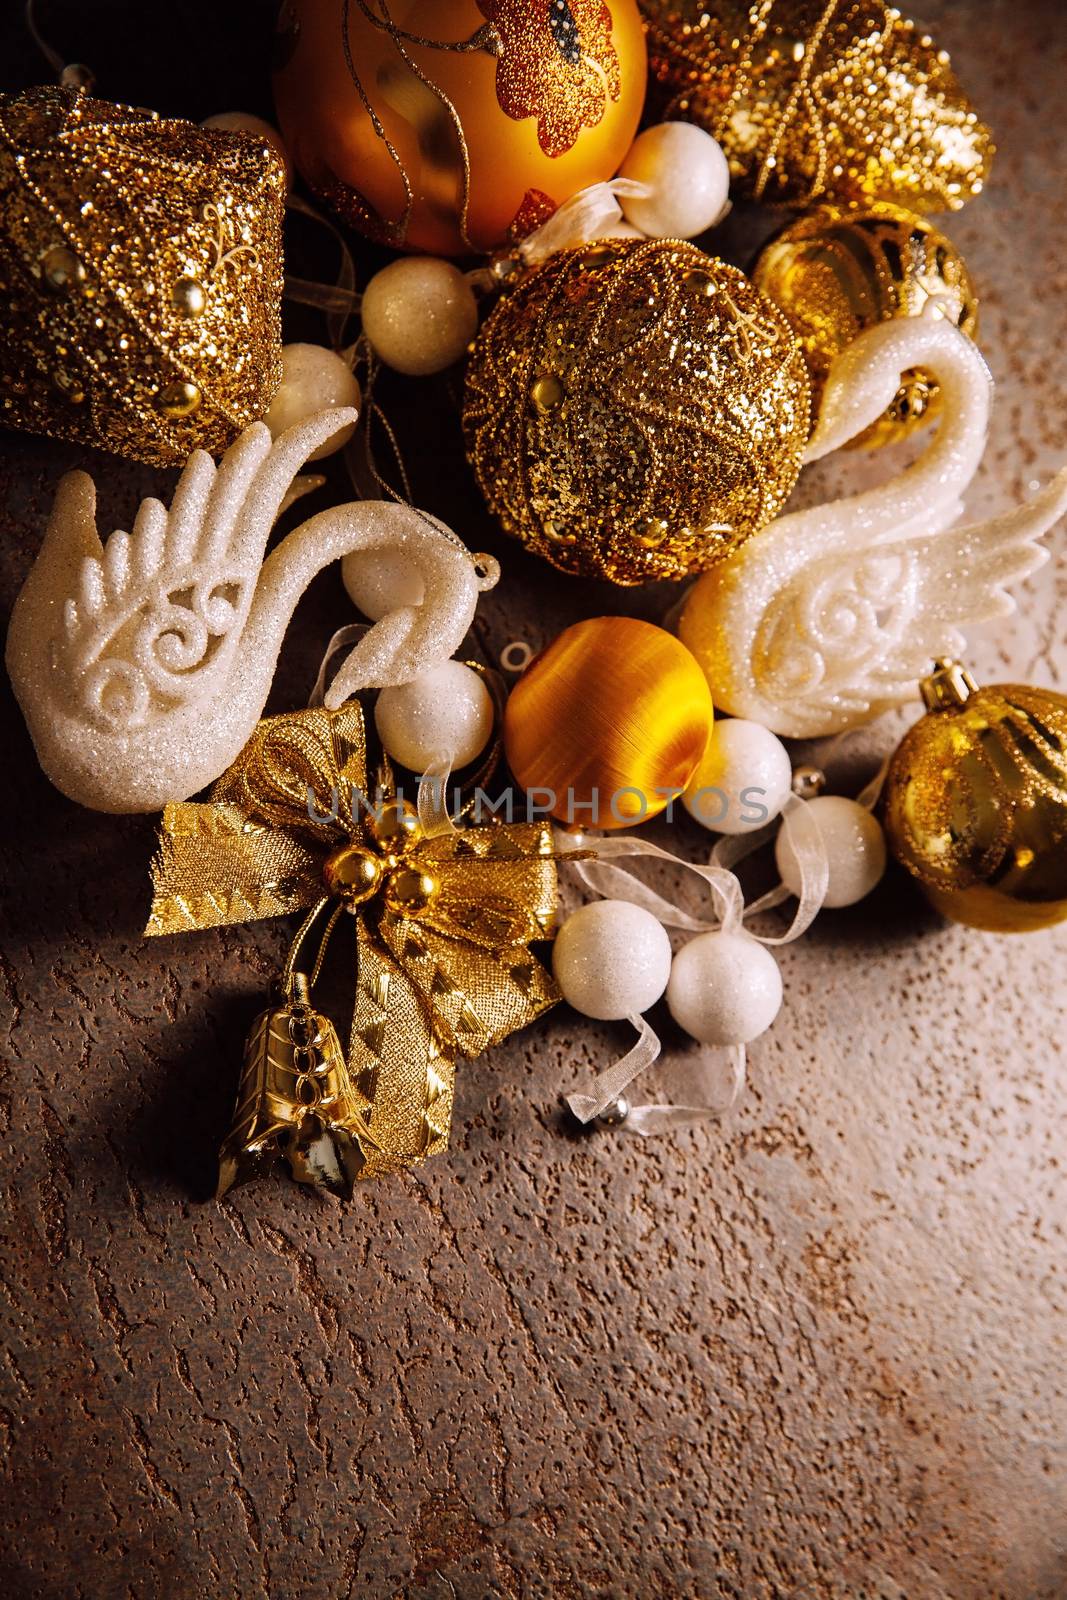 Sparkling Christmas 2019 background with golden and white decor